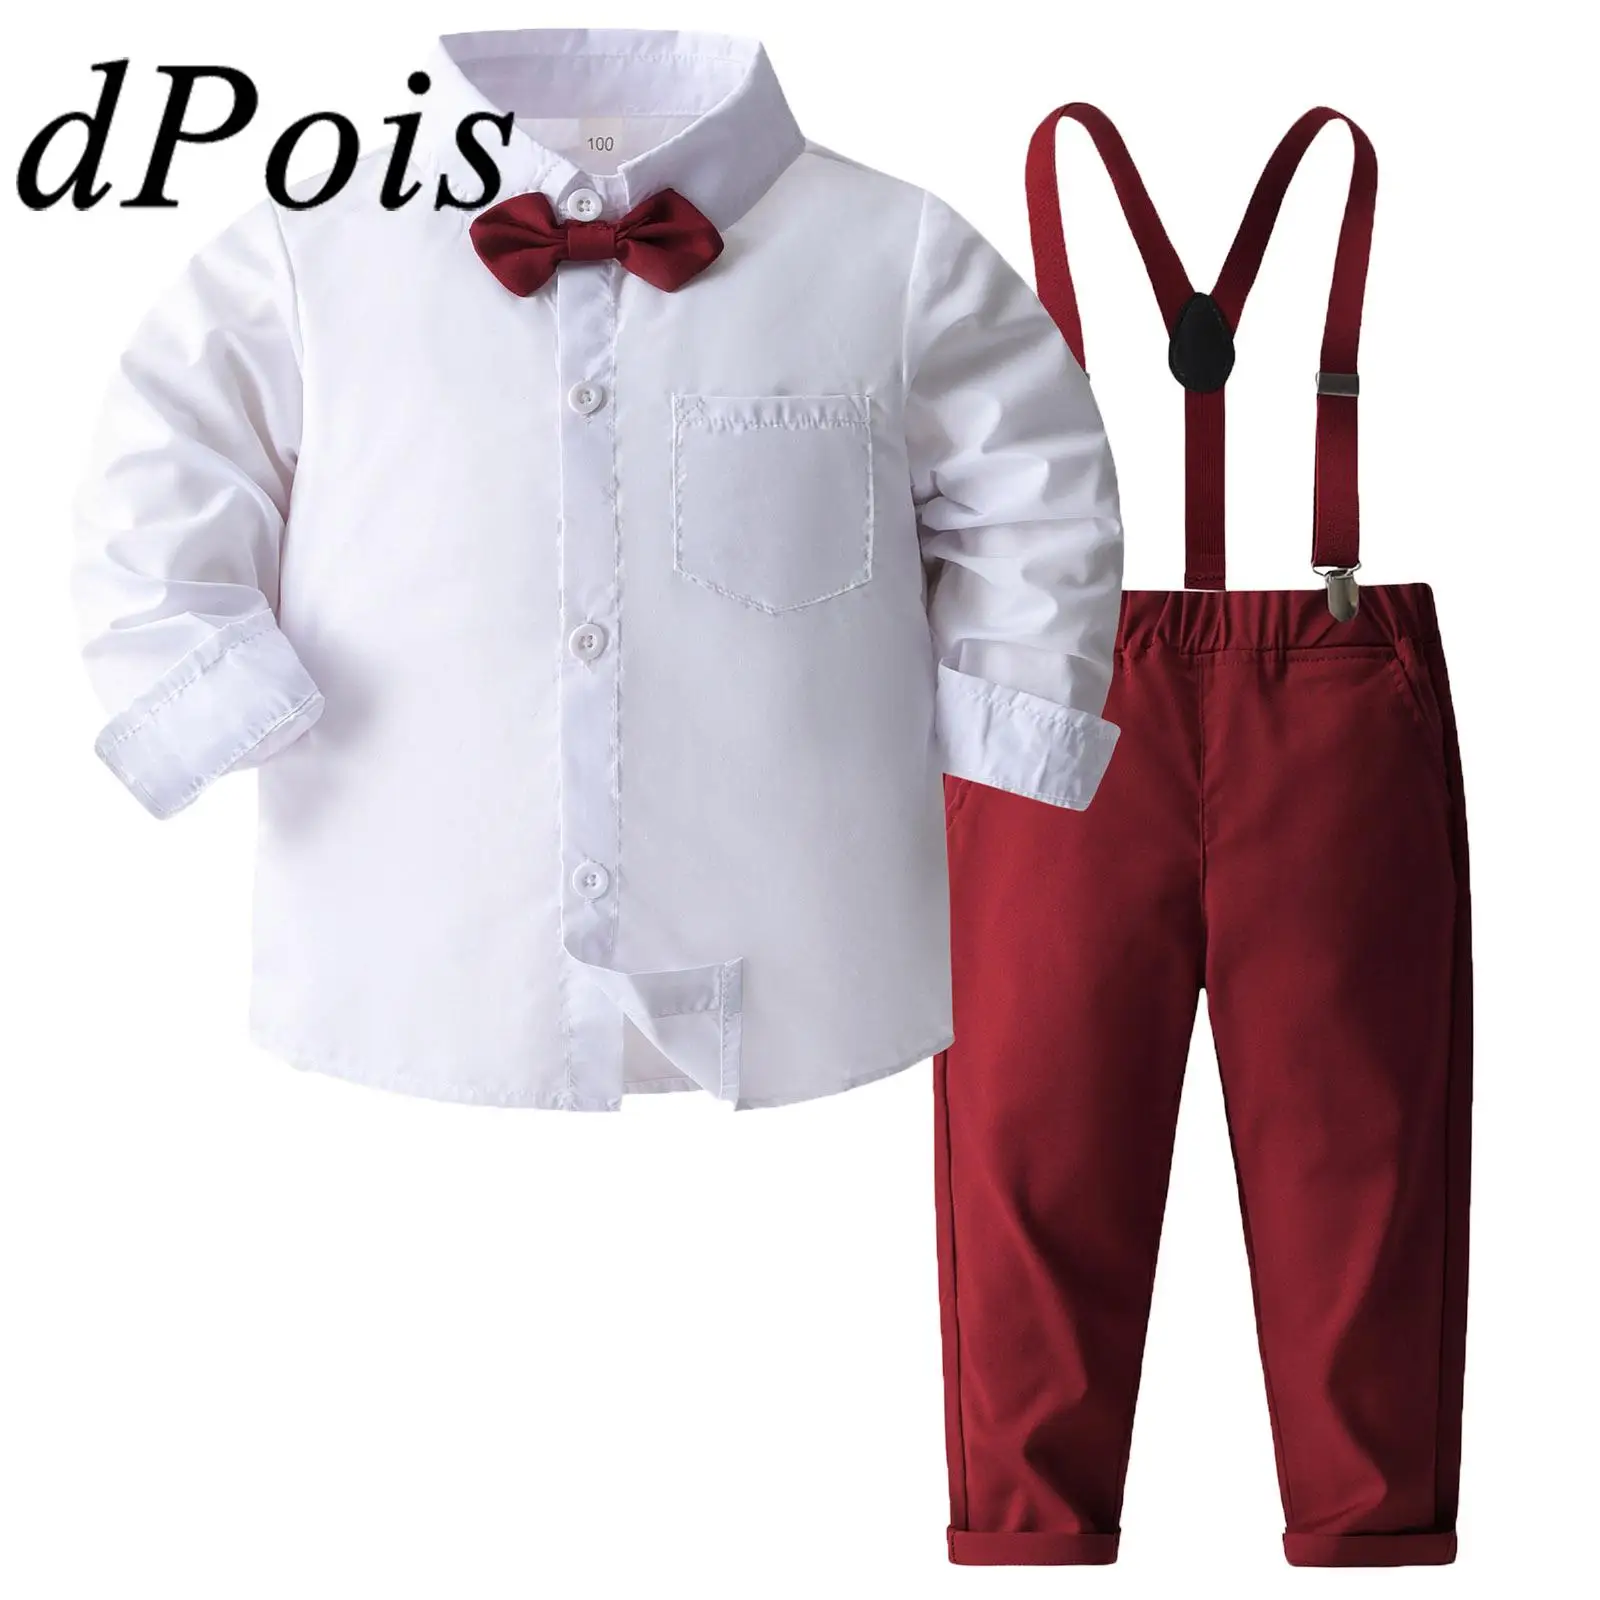 

Kids School Uniform Suit Toddler Boys Gentleman Outfit Long Sleeve Shirt Long Pants Clothes Sets Birthday Party Christening Gown